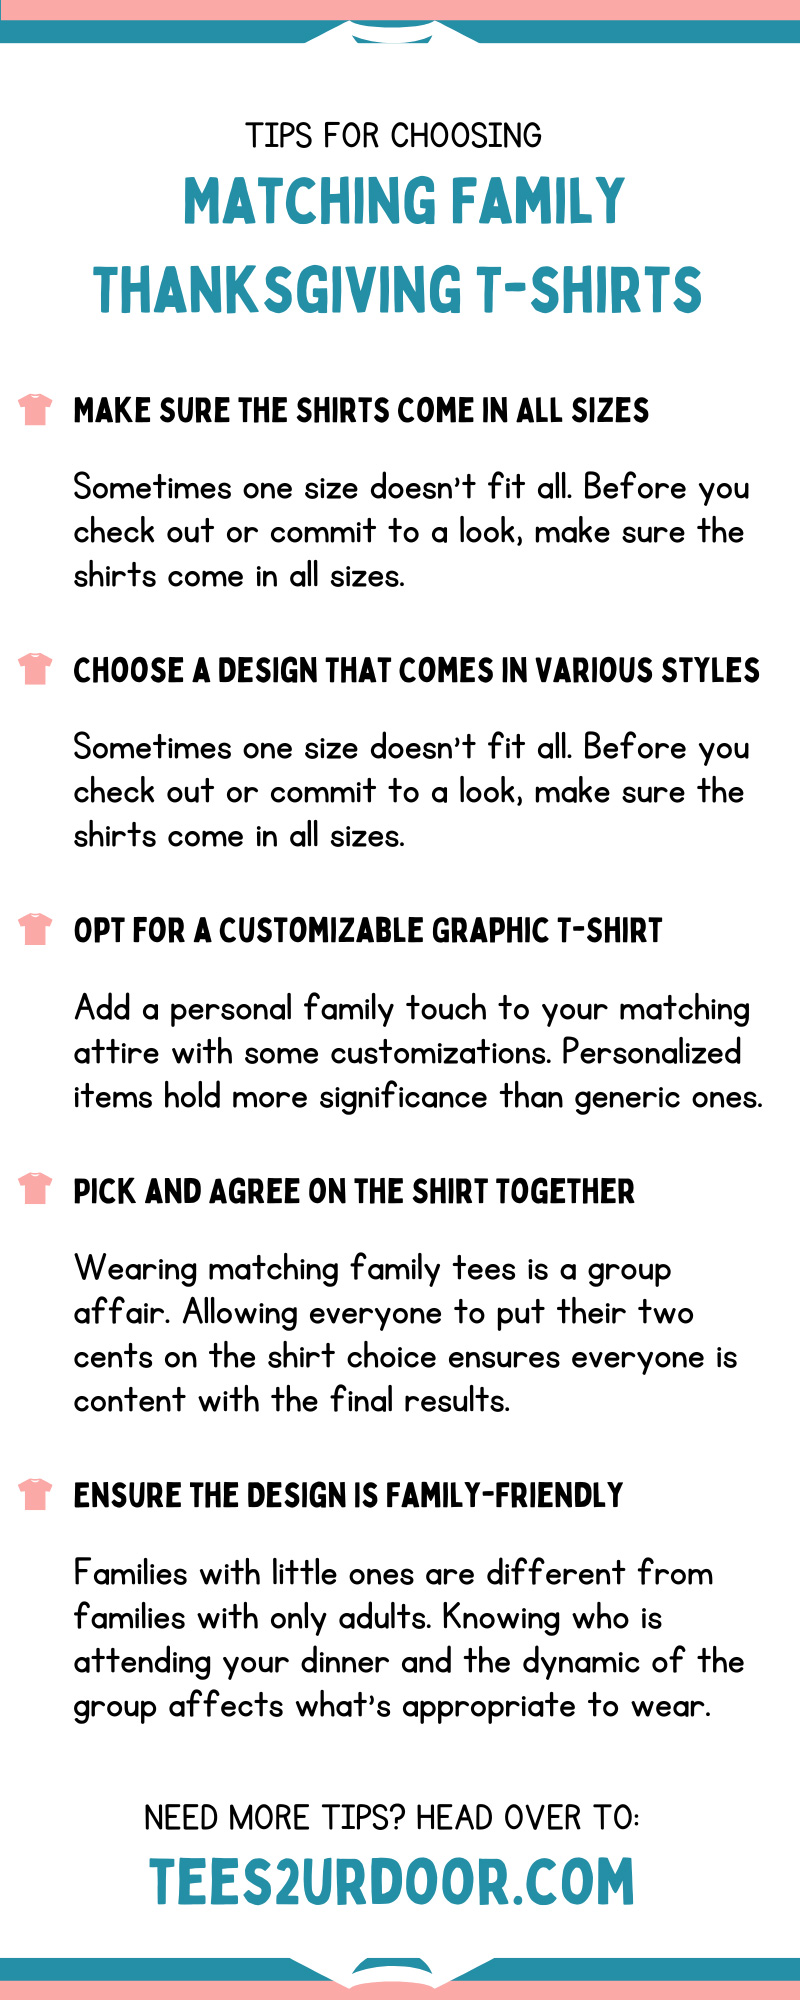 7 Tips for Choosing Matching Family Thanksgiving T-shirts